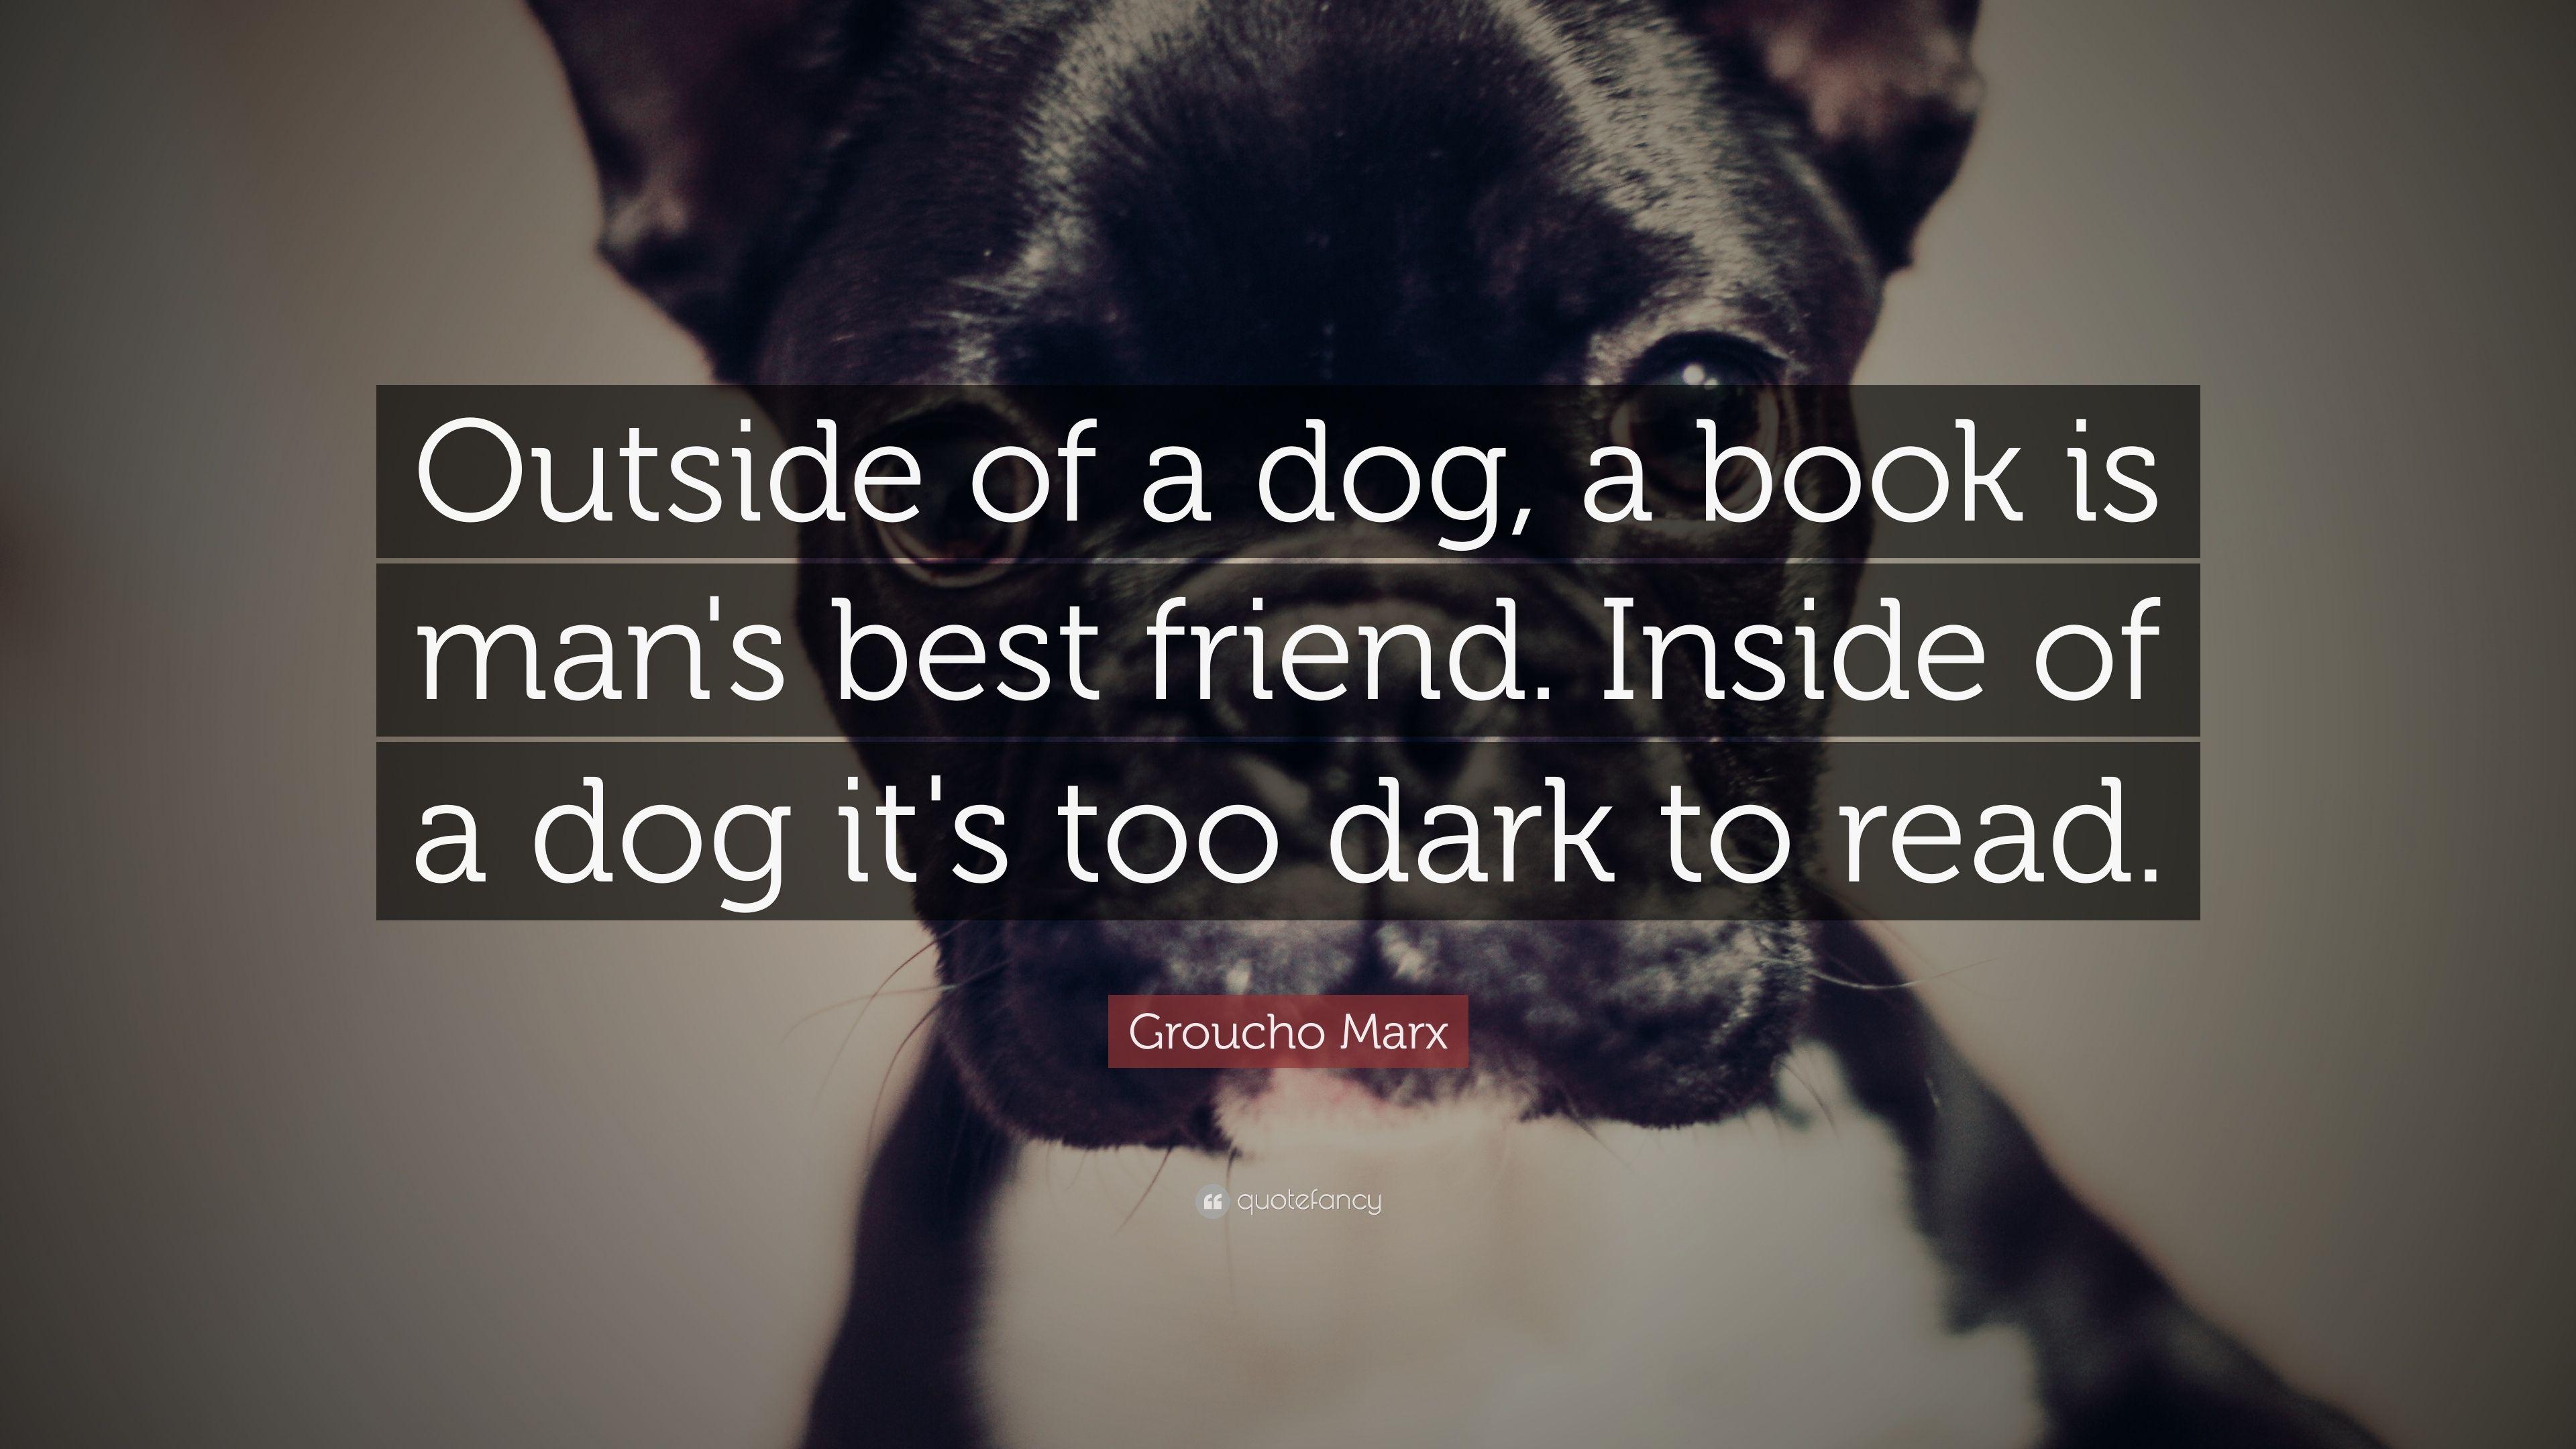 Groucho Marx Quote: “Outside of a dog, a book is man's best friend